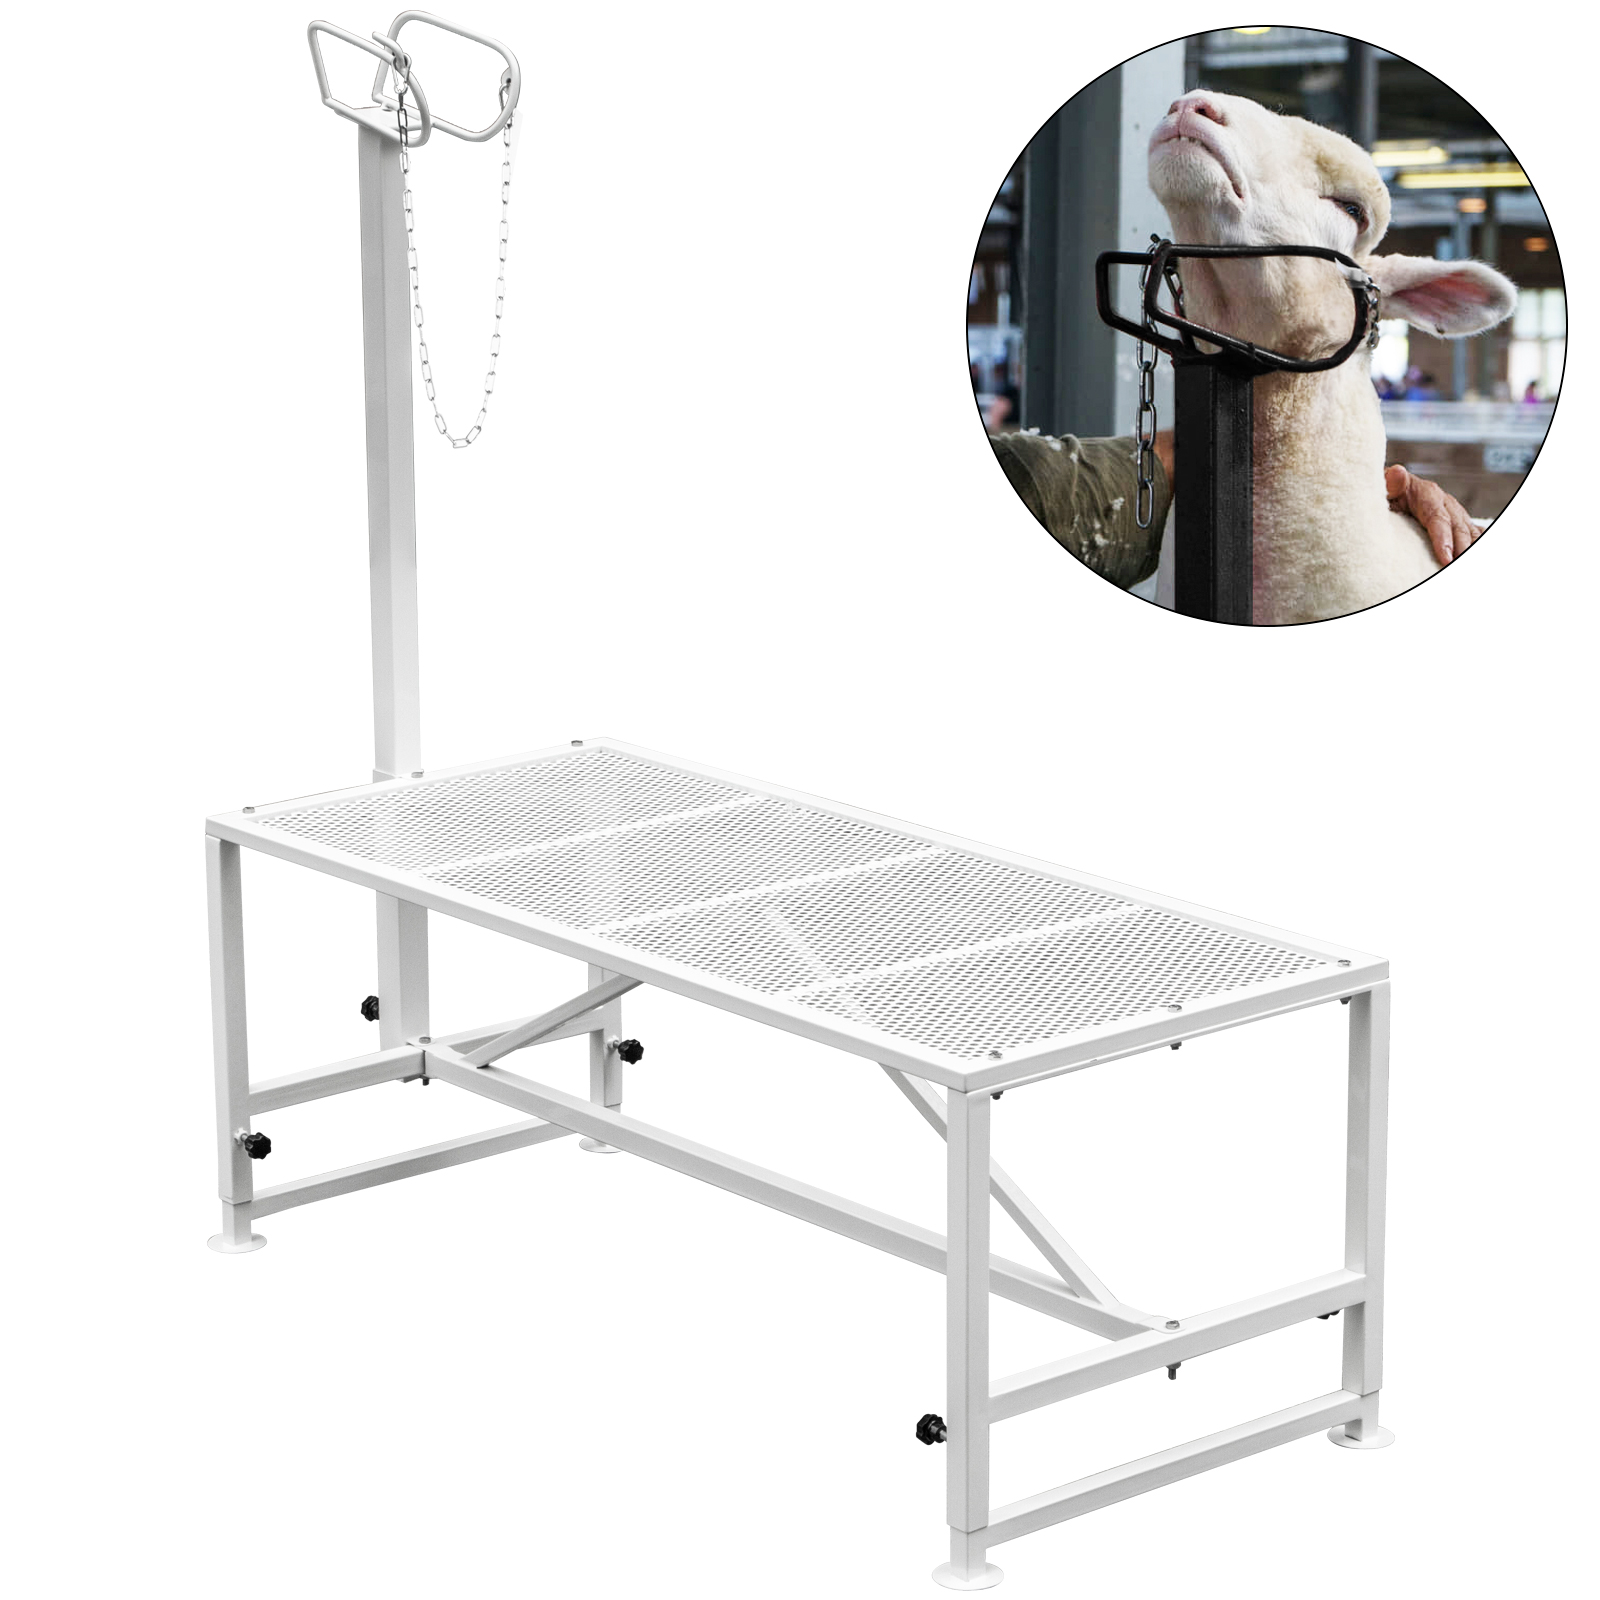 Livestock Trimming Stand 51x23 Inches Livestock Stands For Goats With Headpiece от Vevor Many GEOs